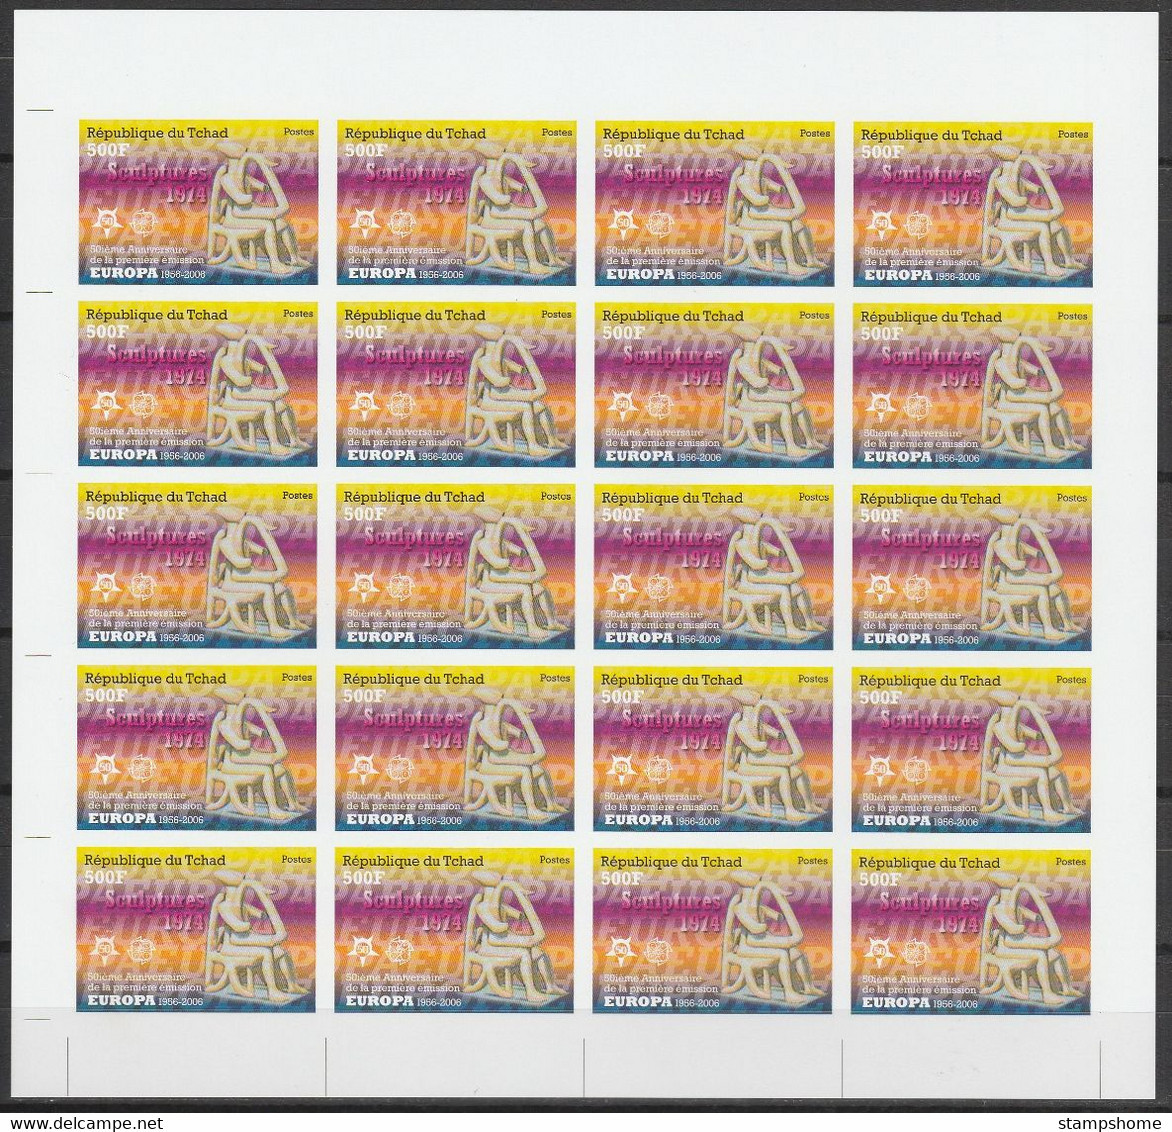 Europa Cept - 2005 - Tchad, Chad - 8.Complete Sheetlet of 20 sets - (imp.) ** MNH